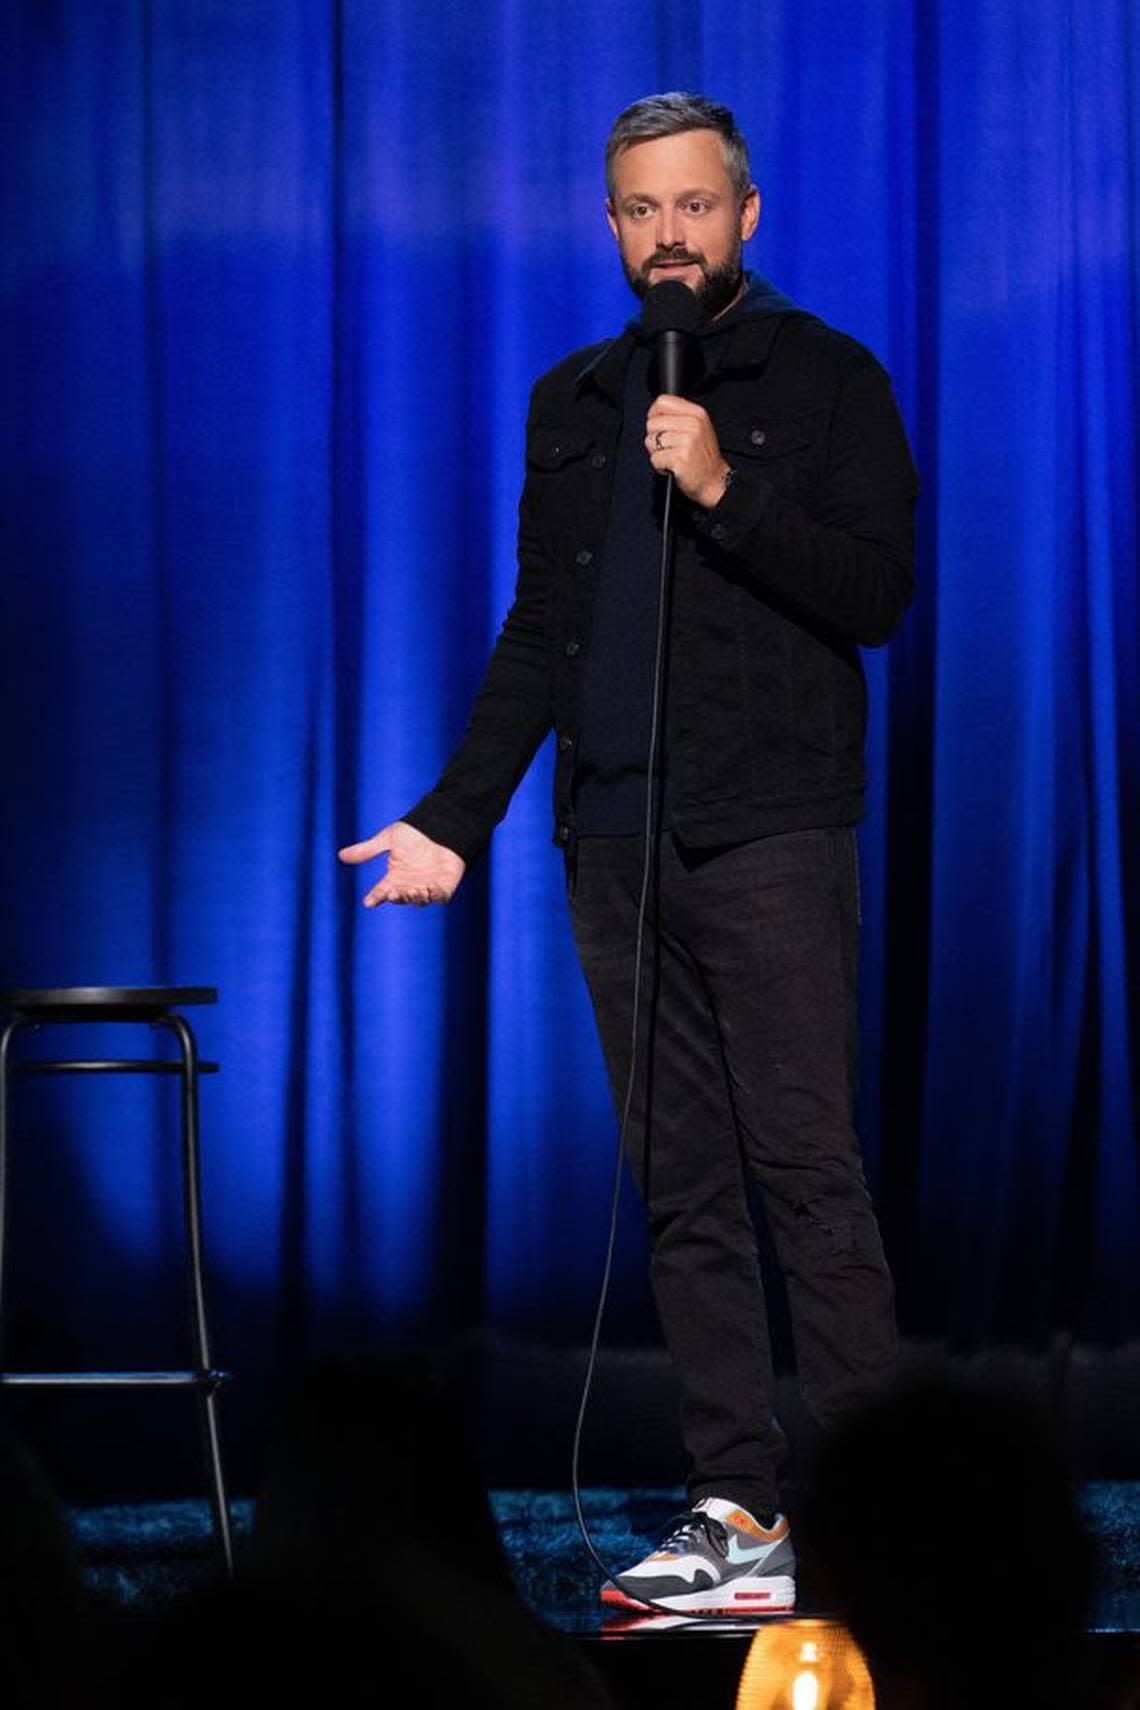 Nate Bargatze is a popular touring comedian with several Netflix stand-up specials.